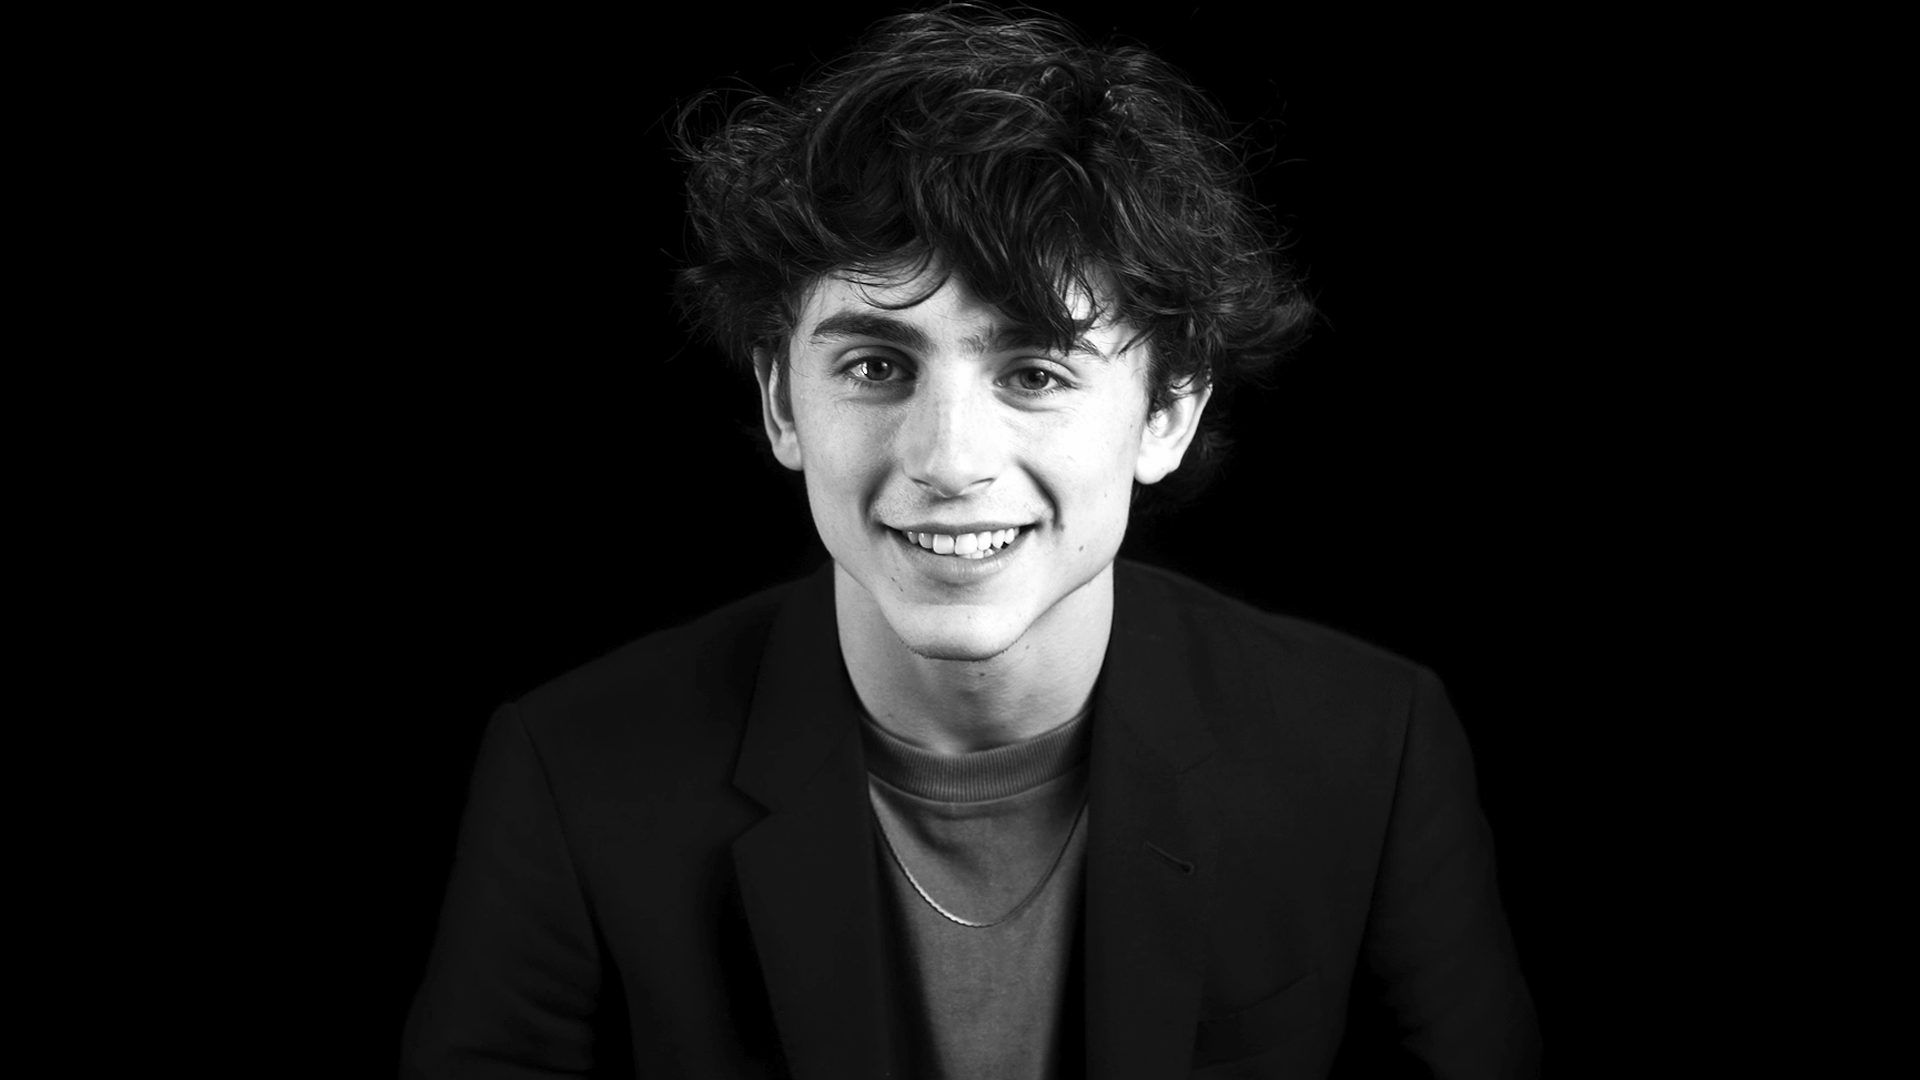 Timothee Chalamet 1080P 2k 4k HD wallpapers backgrounds free download   Rare Gallery